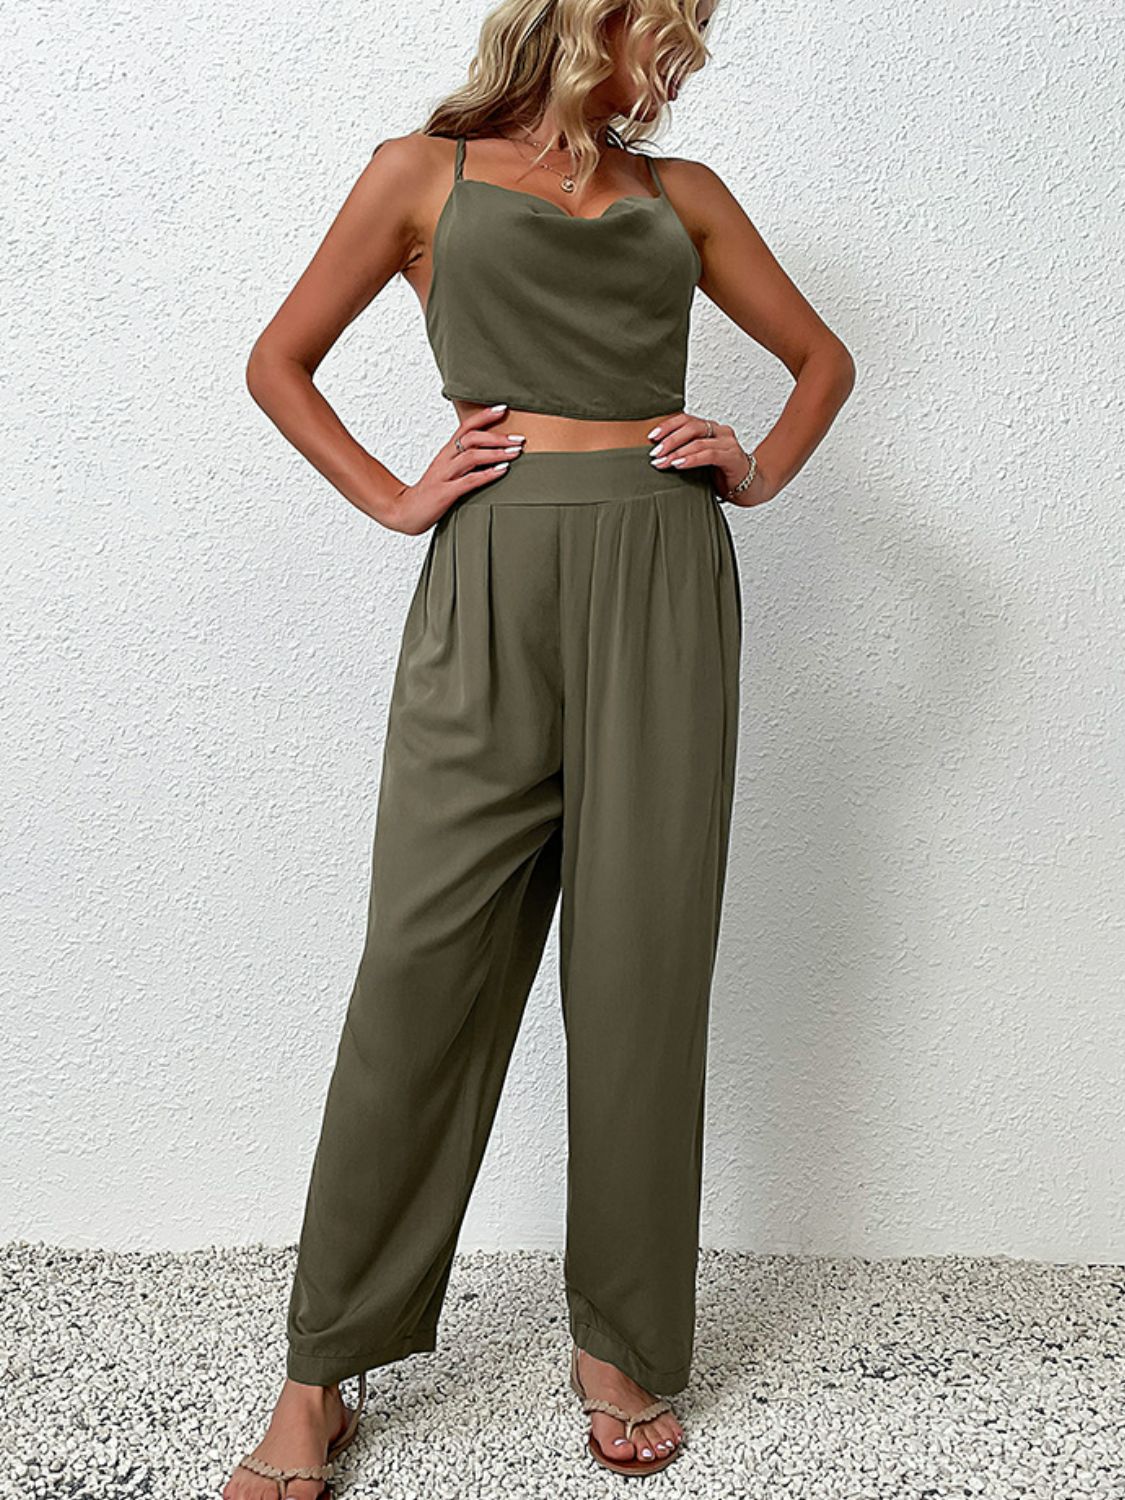 Crisscross Back Cropped Top and Pants Set - Minihomy